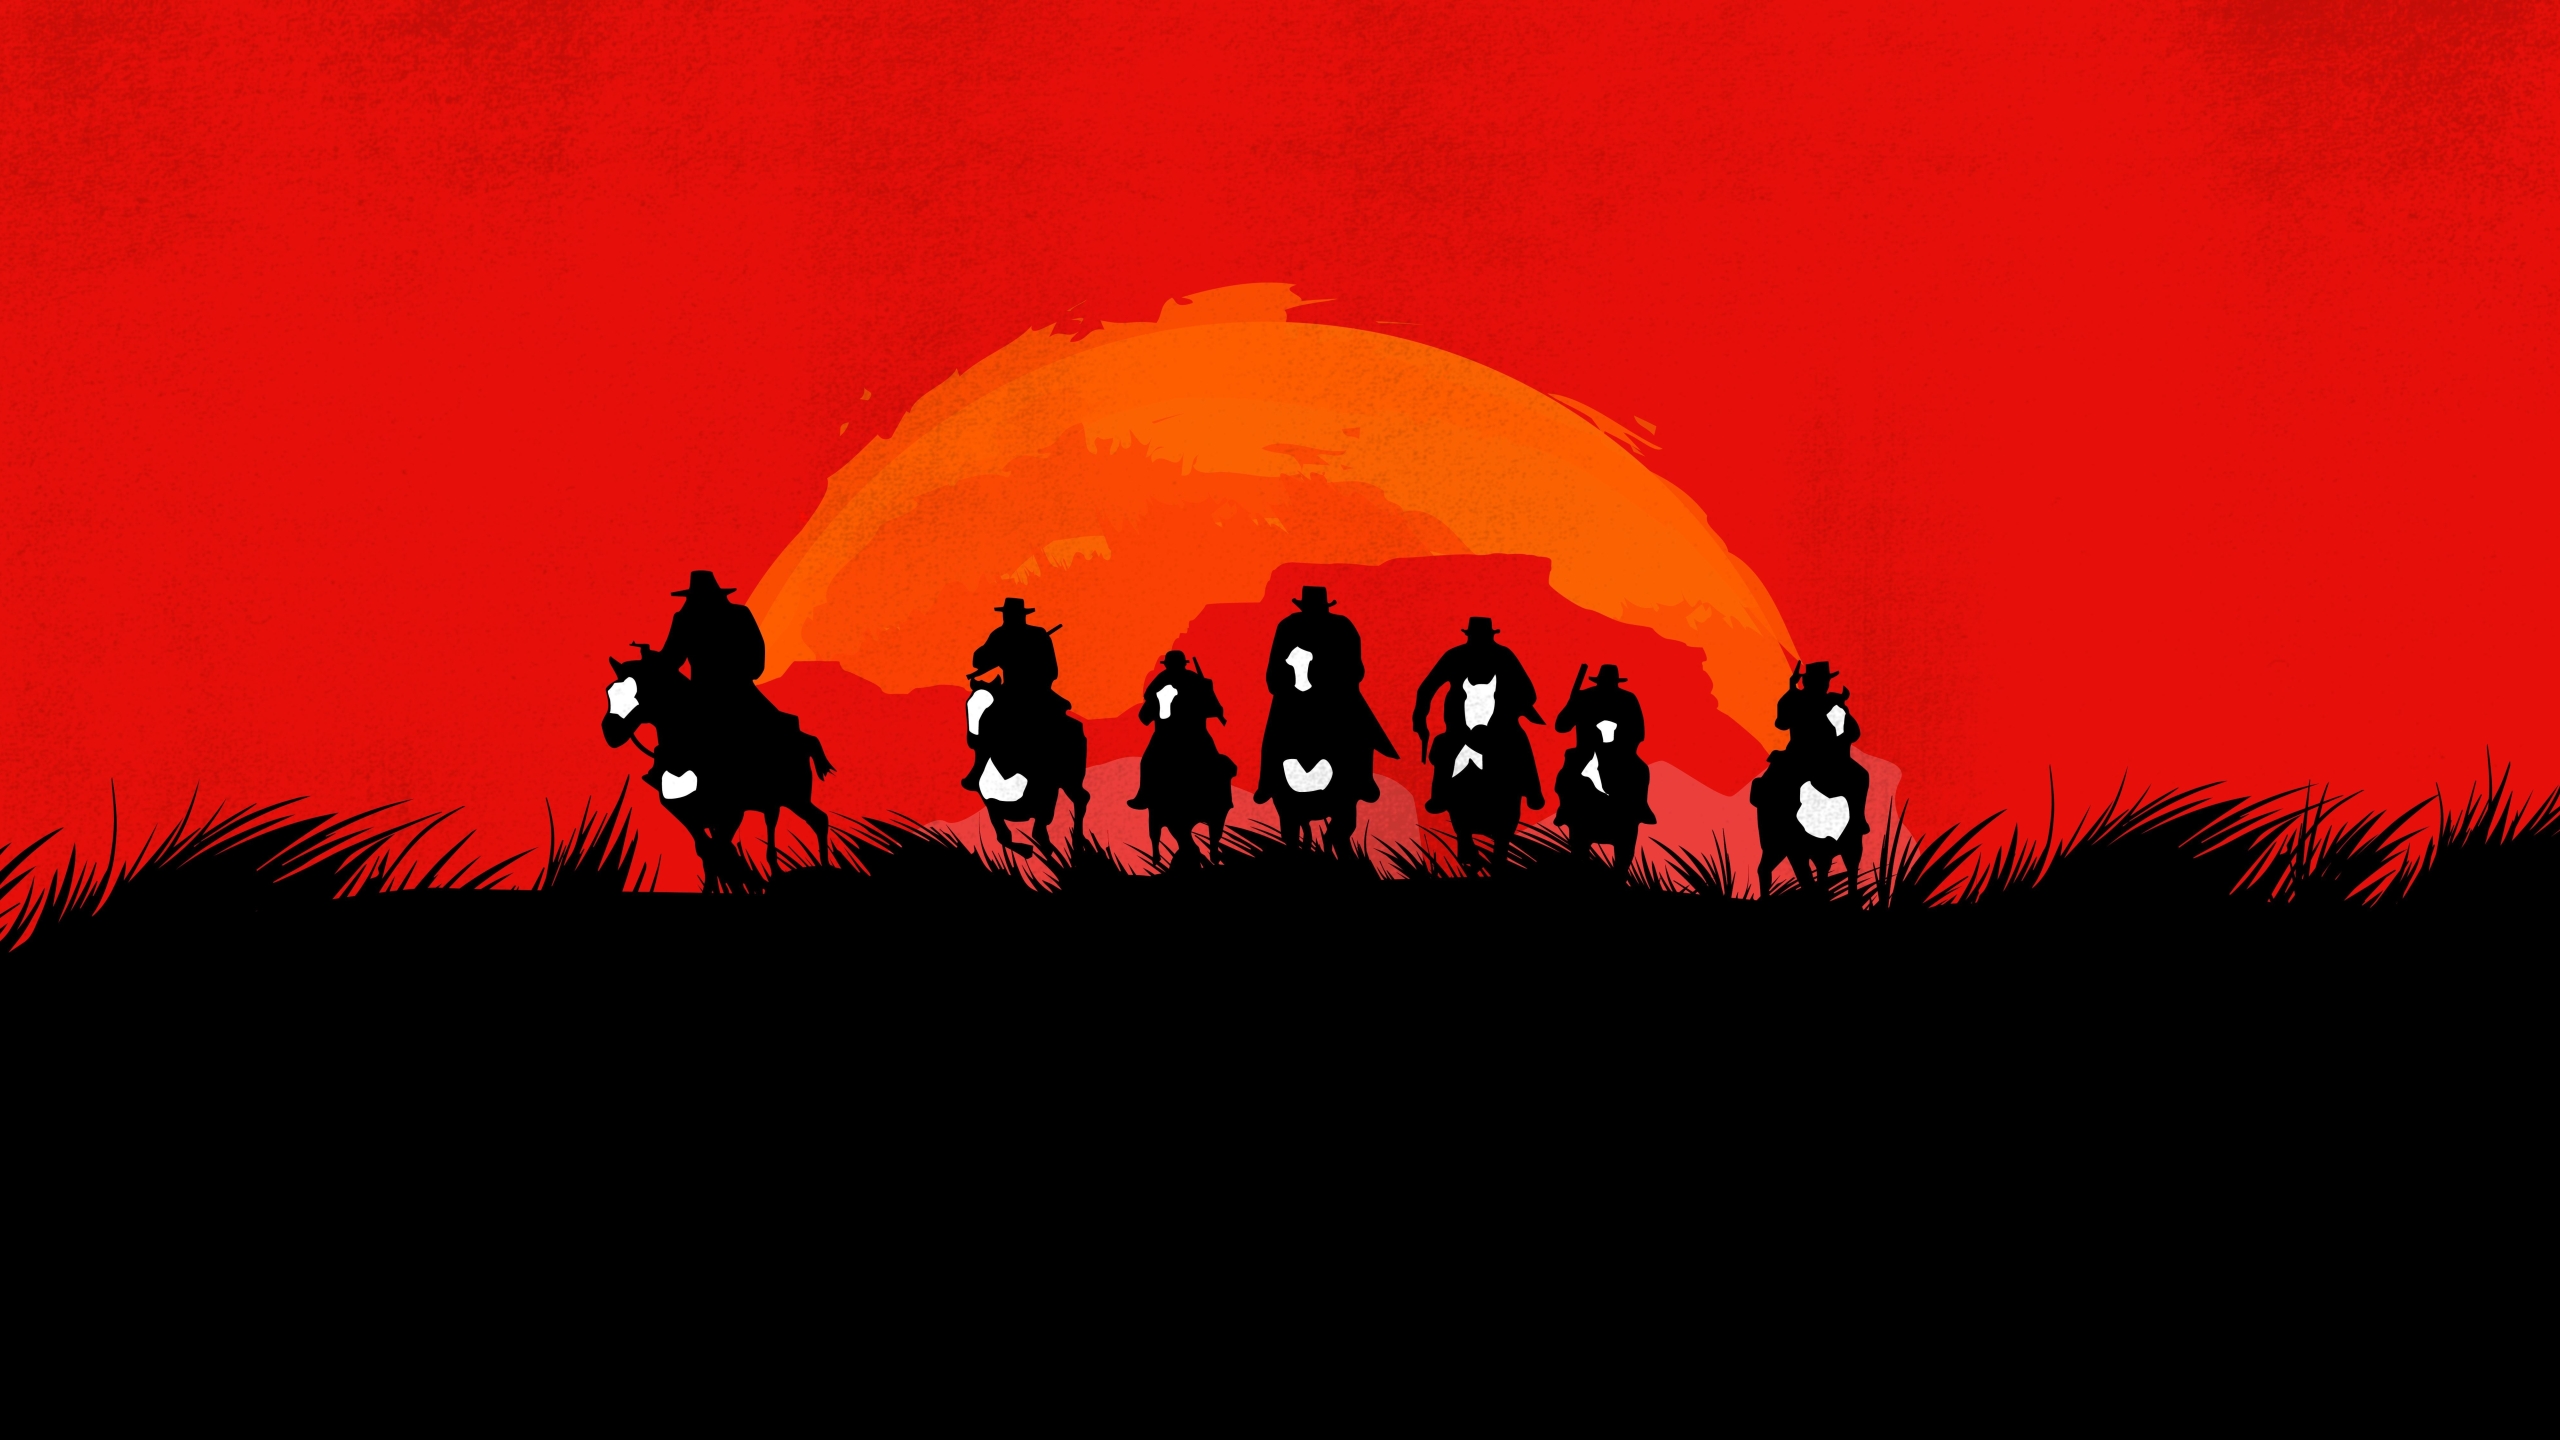 1440p red dead redemption 2 wallpapers